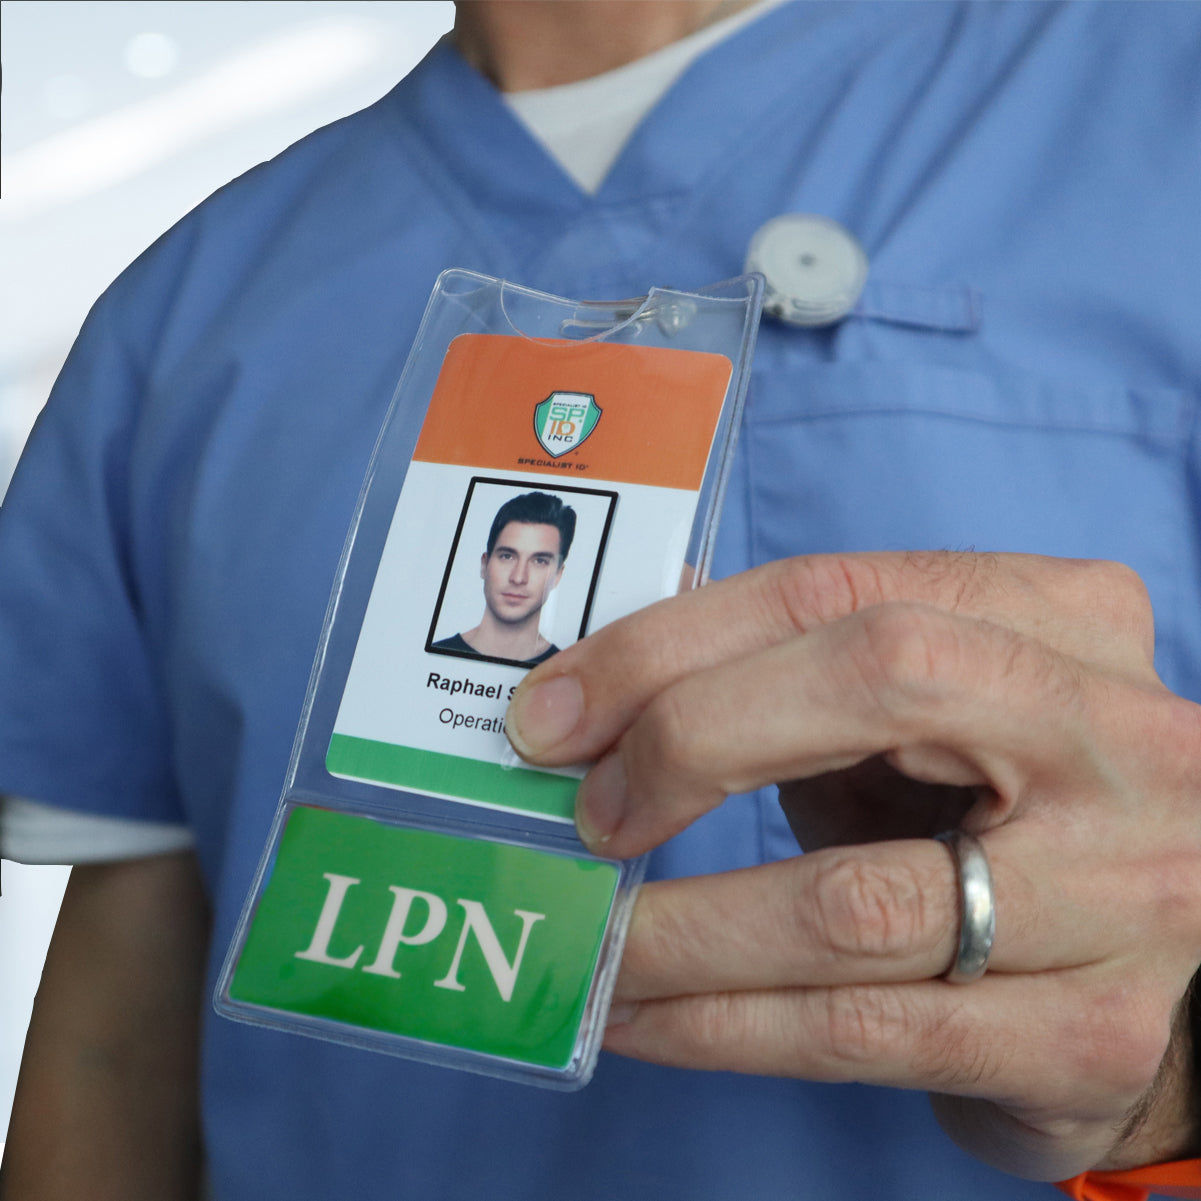 LPN BadgeBottom ID Card and LPN Badge Buddy all in one for healthcare professionals